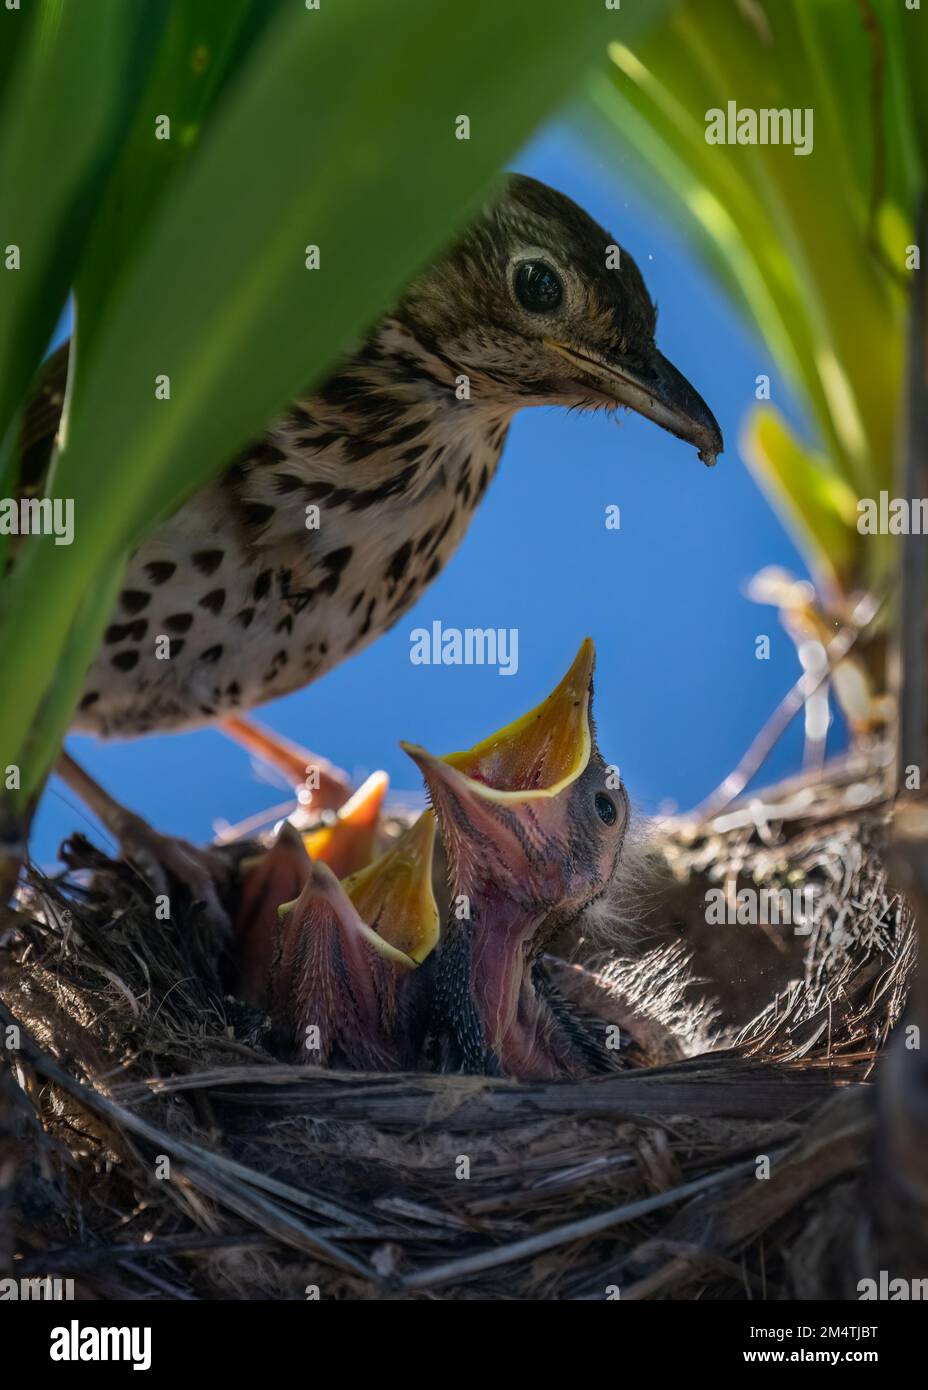 Hungry baby Song thrushes (Turdus philomelos) open mouth widely and cry for mother to feed them. Vertical format. Stock Photo